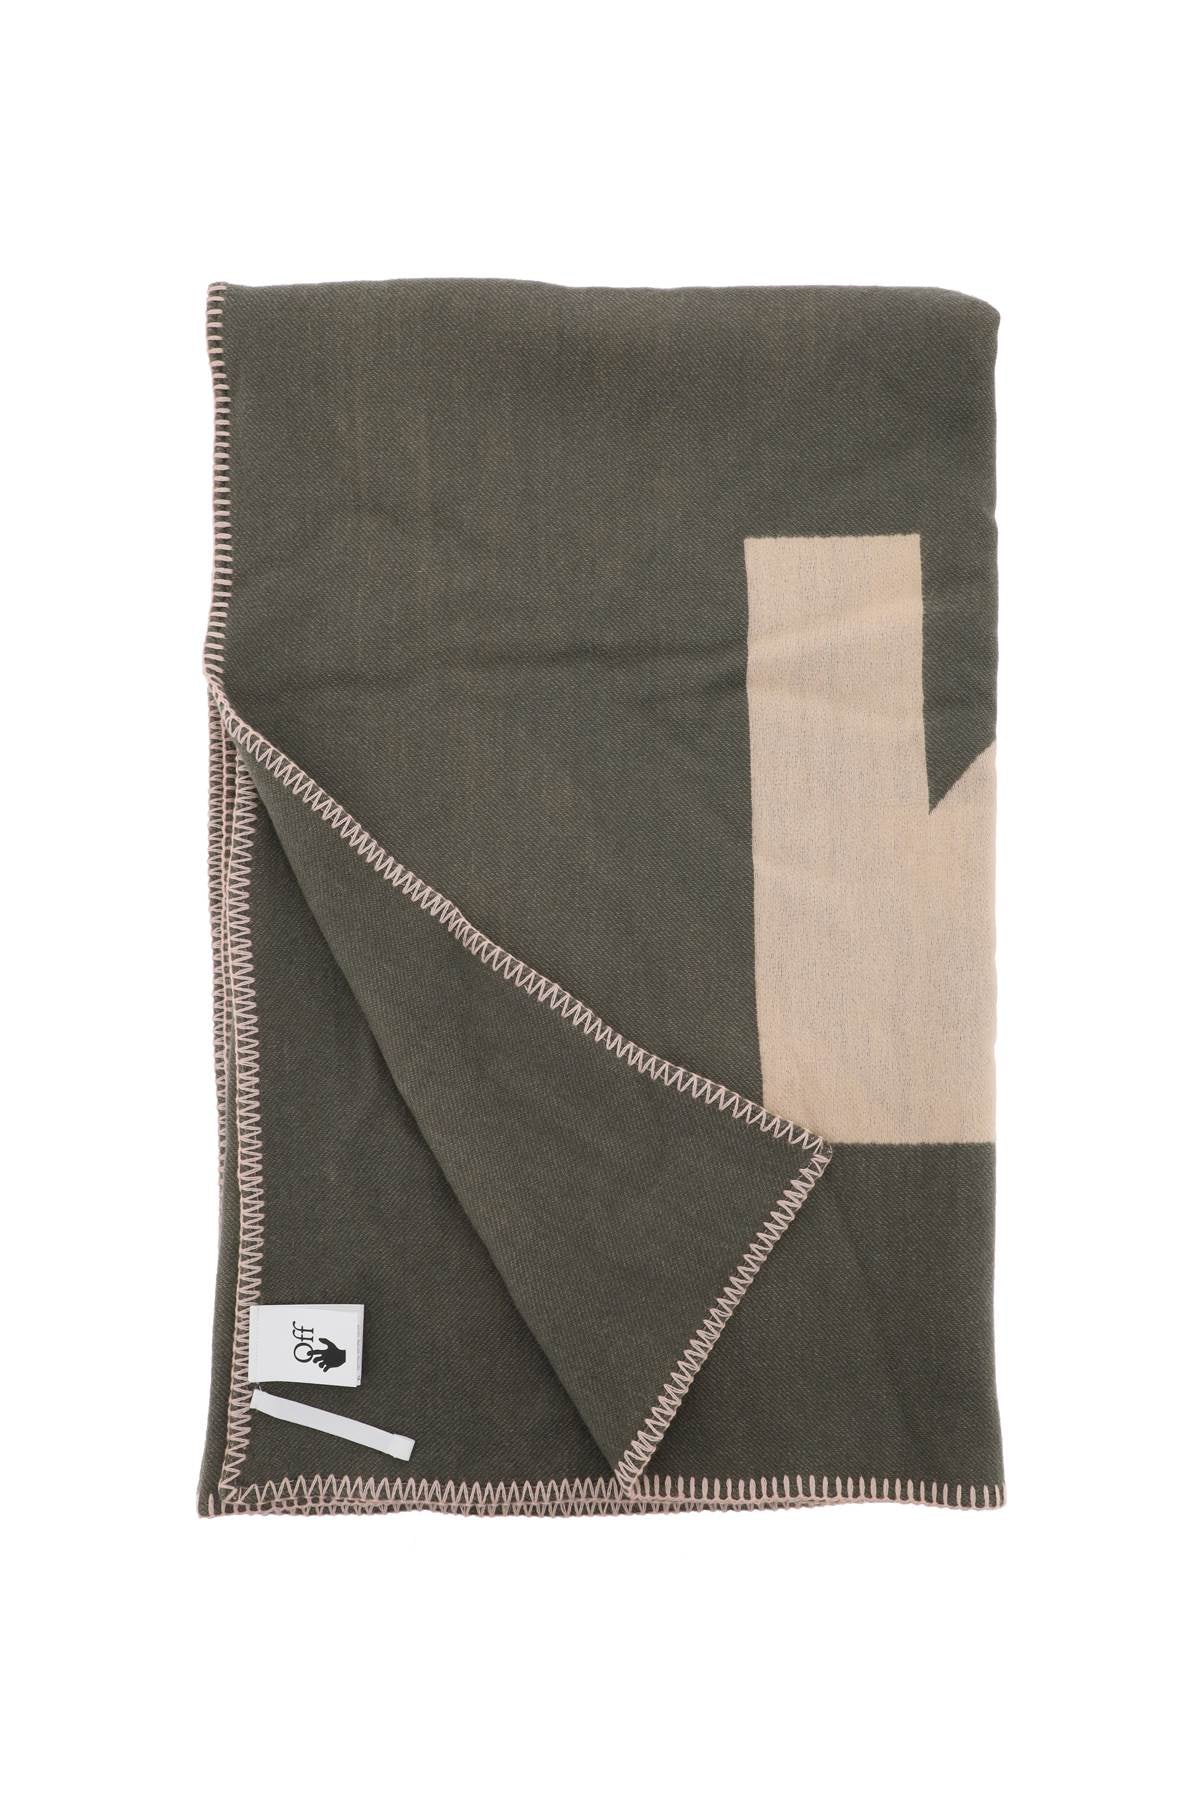 Green Wool Blend Blanket with Iconic Arrow by OFF-WHITE HOME